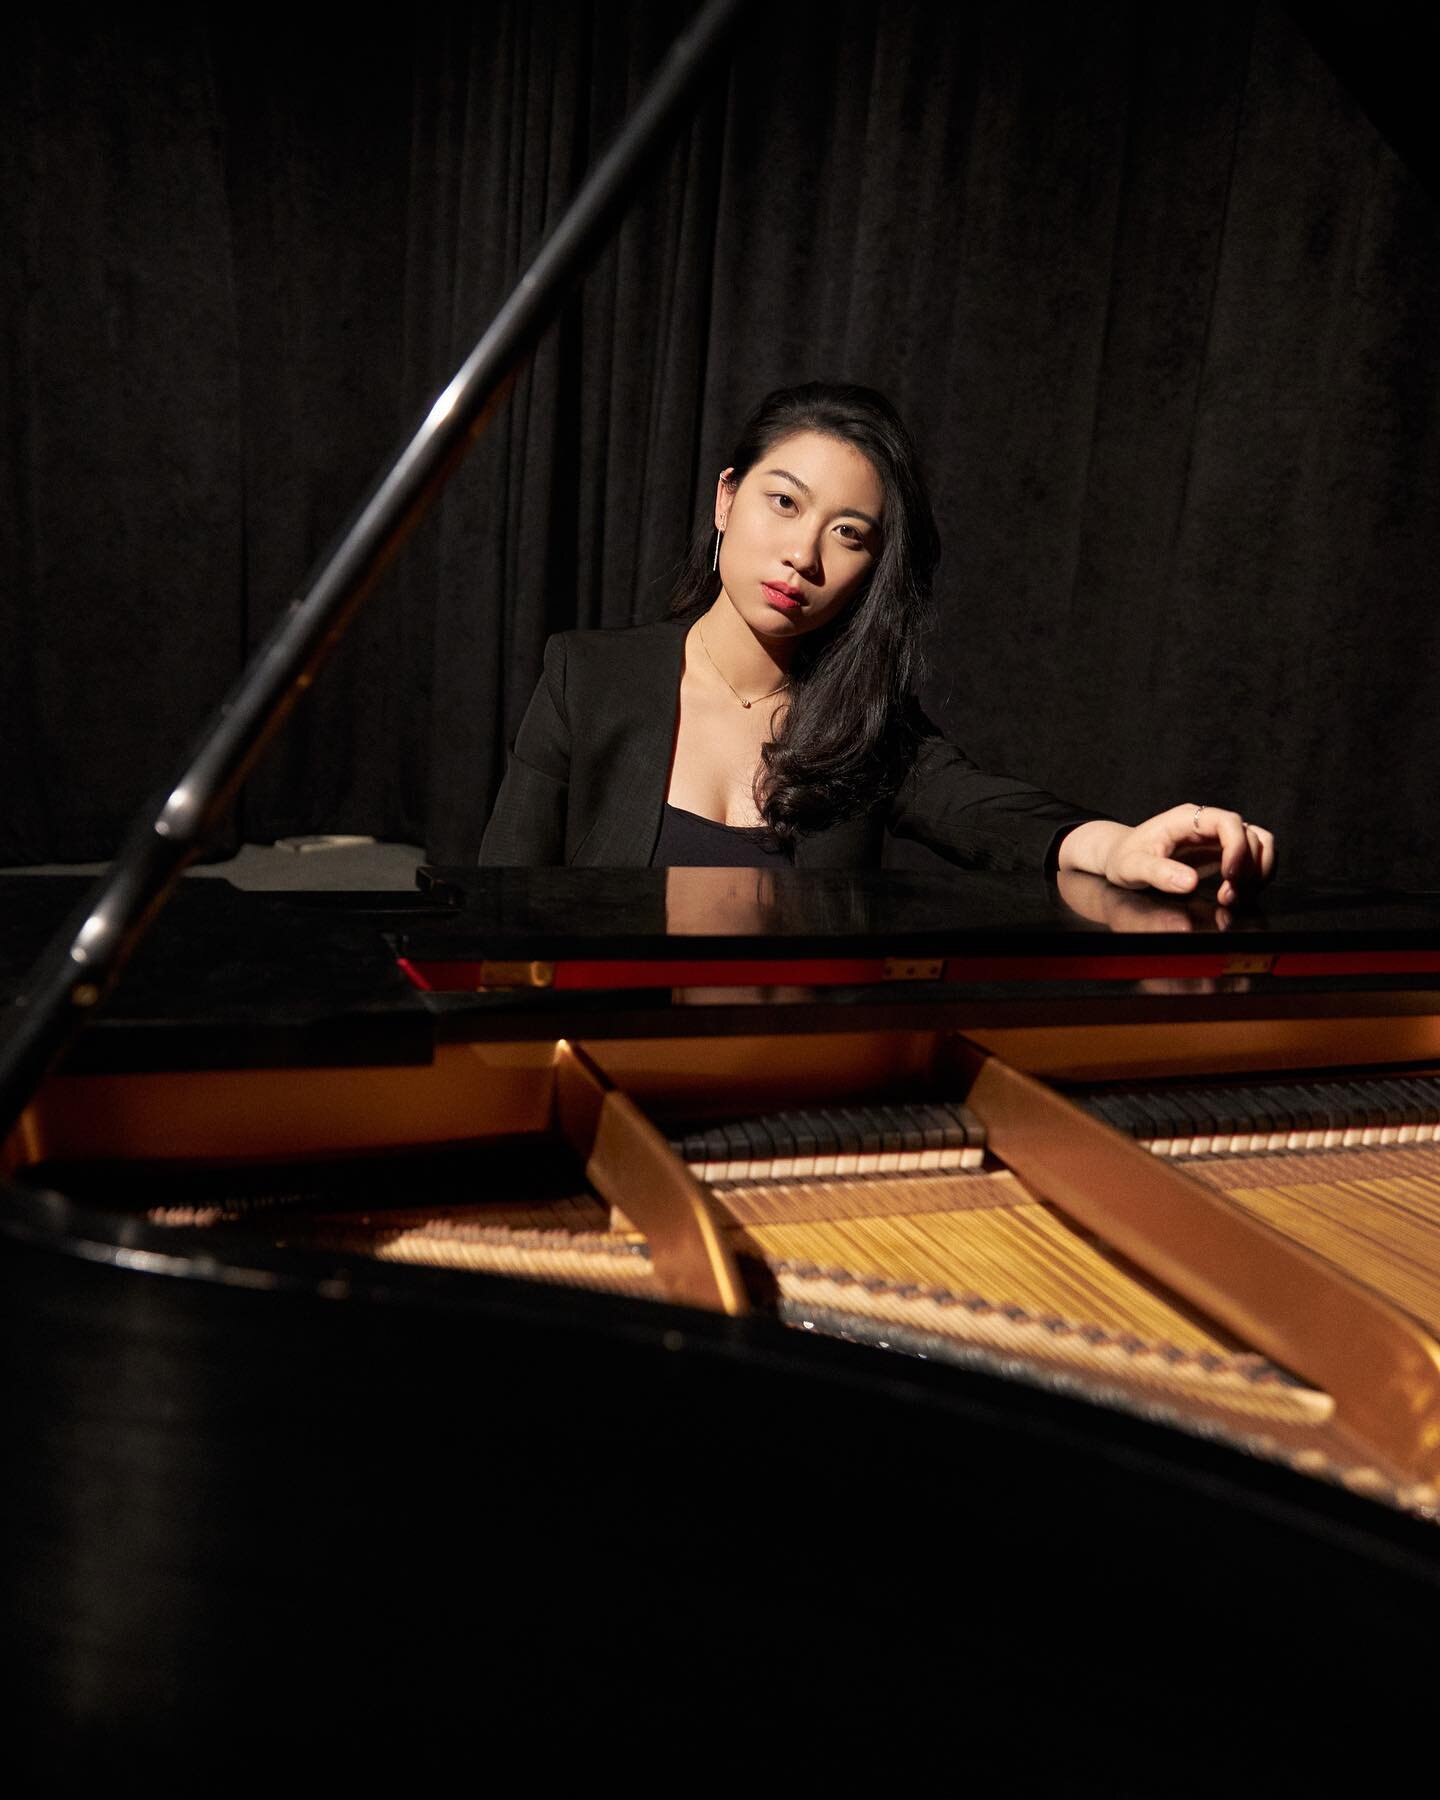 Born in Shenzhen, China, Luo-Wei showed great interest in music and began piano lessons at age five. She gave her debut recital in Hong Kong at age six. Winner of numerous competitions in China, Wei also claimed first prize in the 11th Chopin Interna